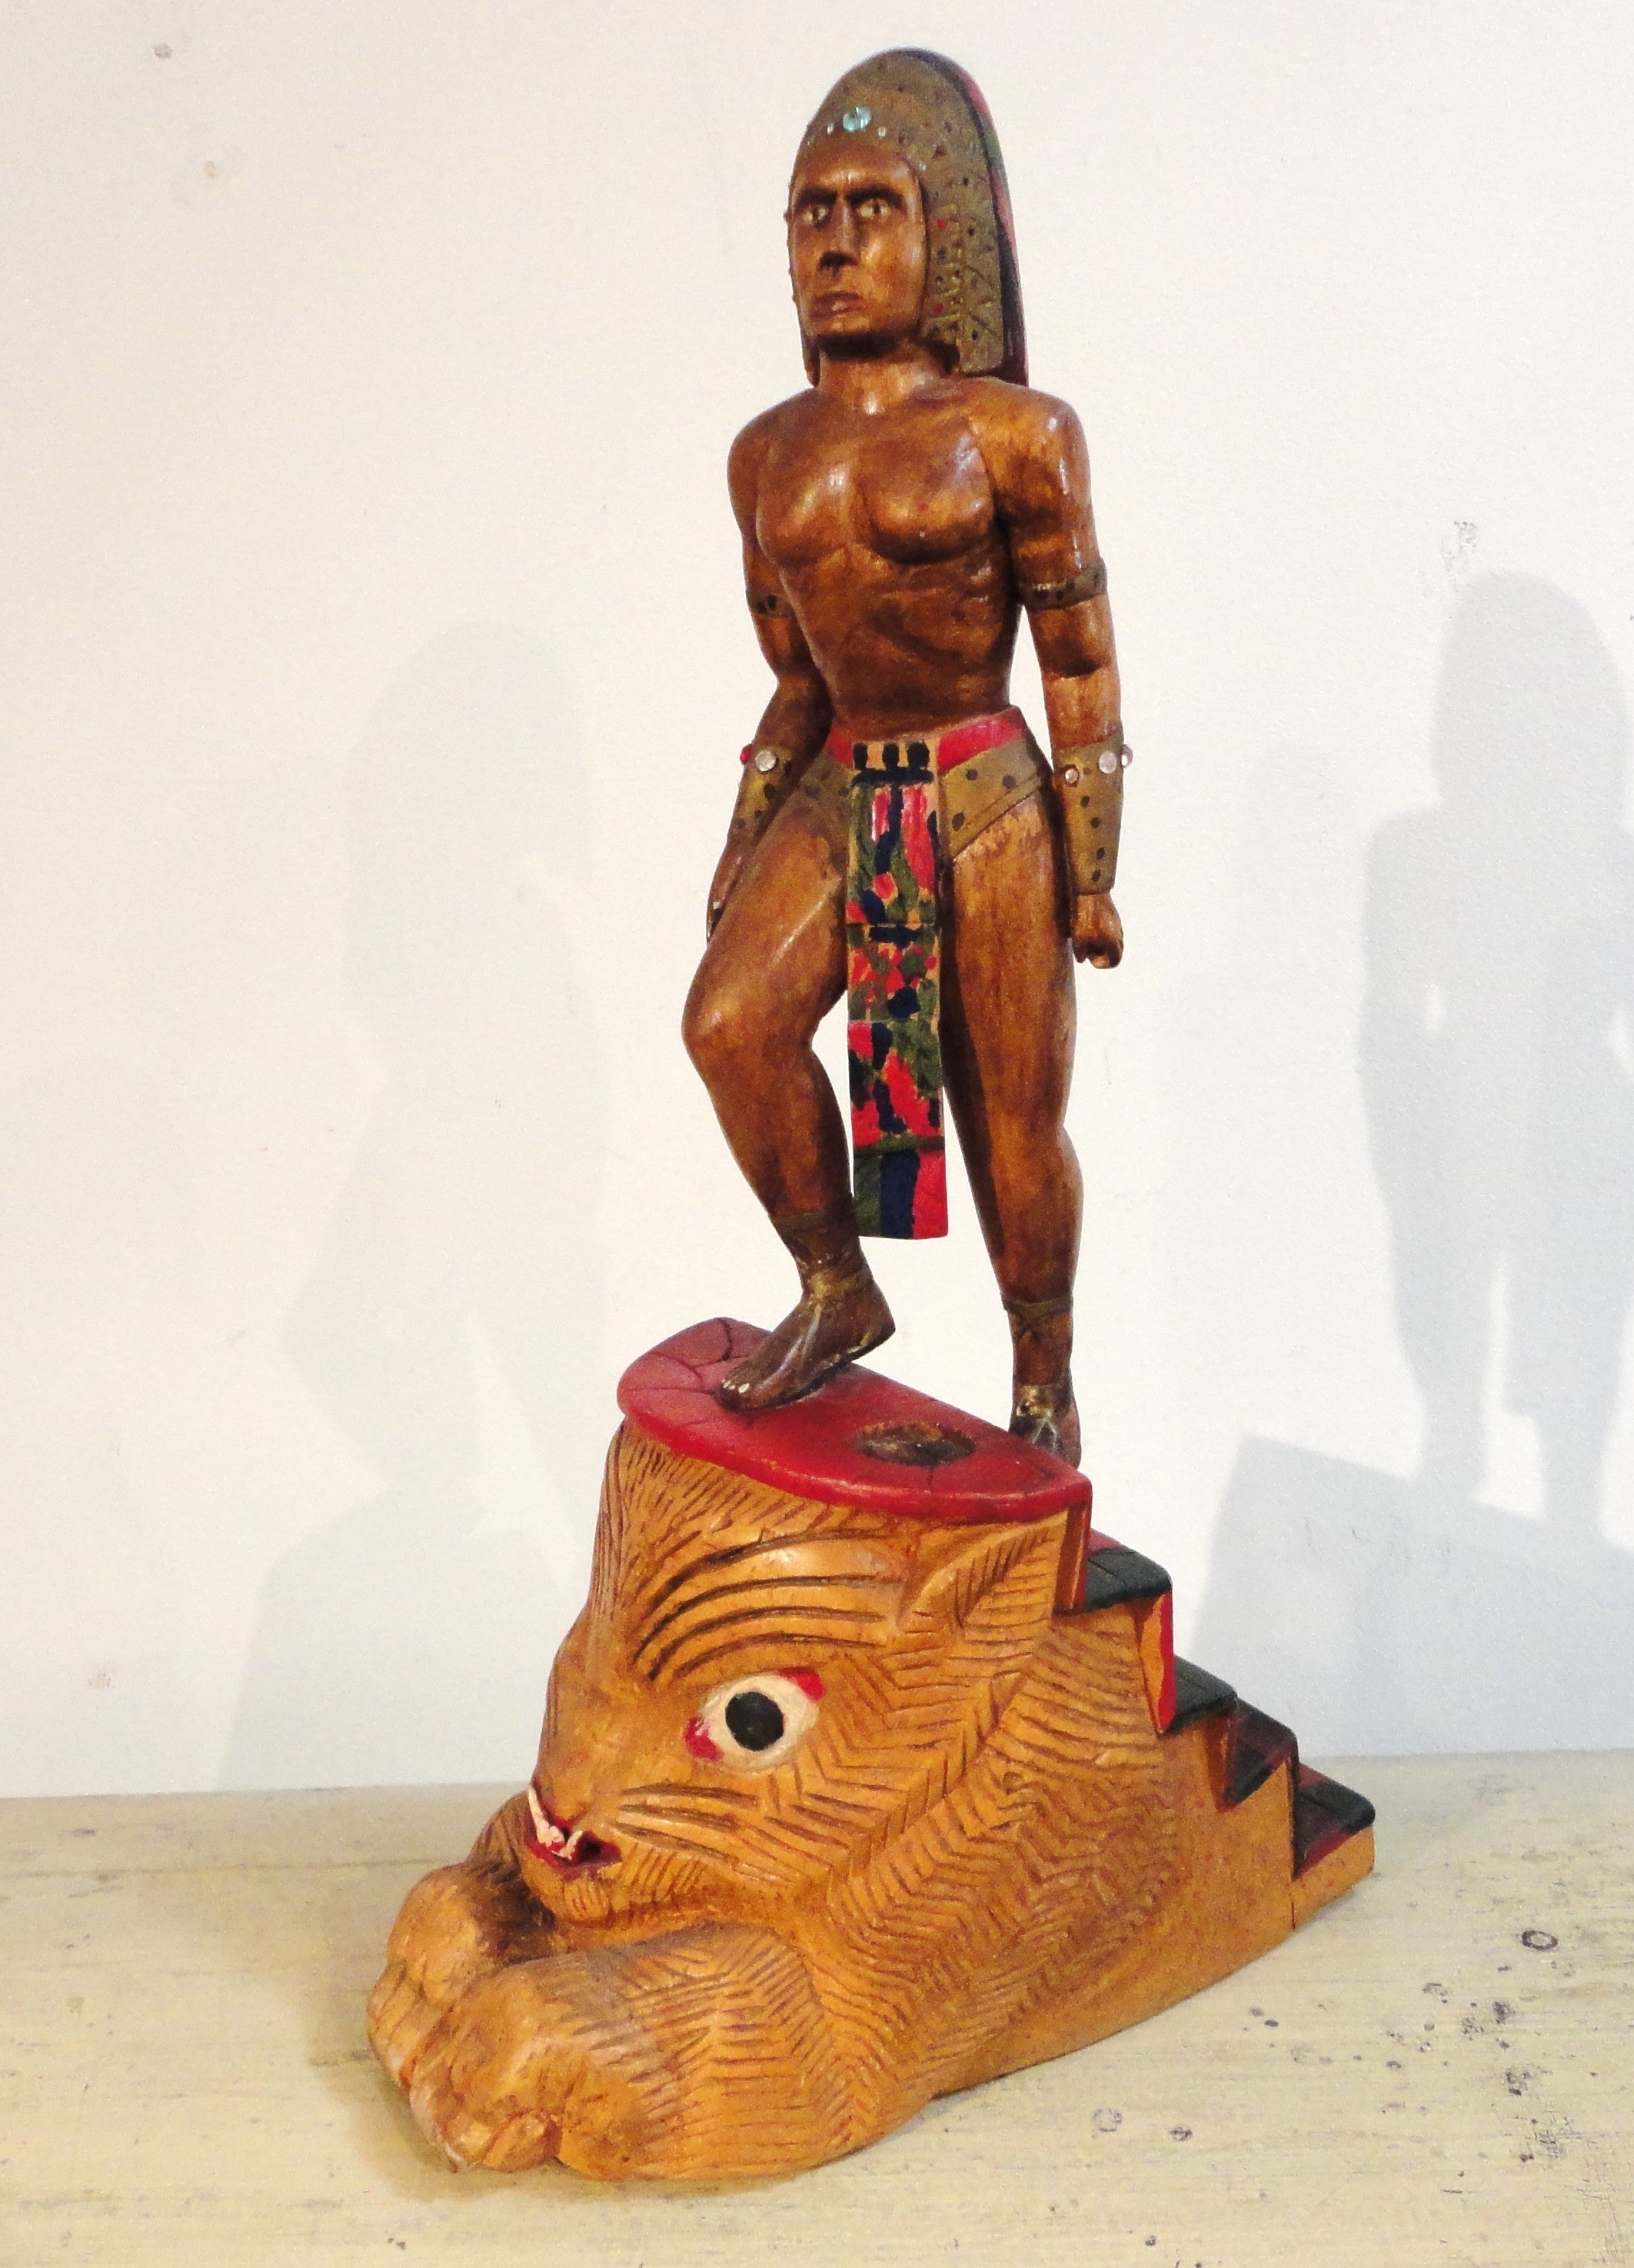 Hand-Carved and Painted Indian Sculpture on Bobcat